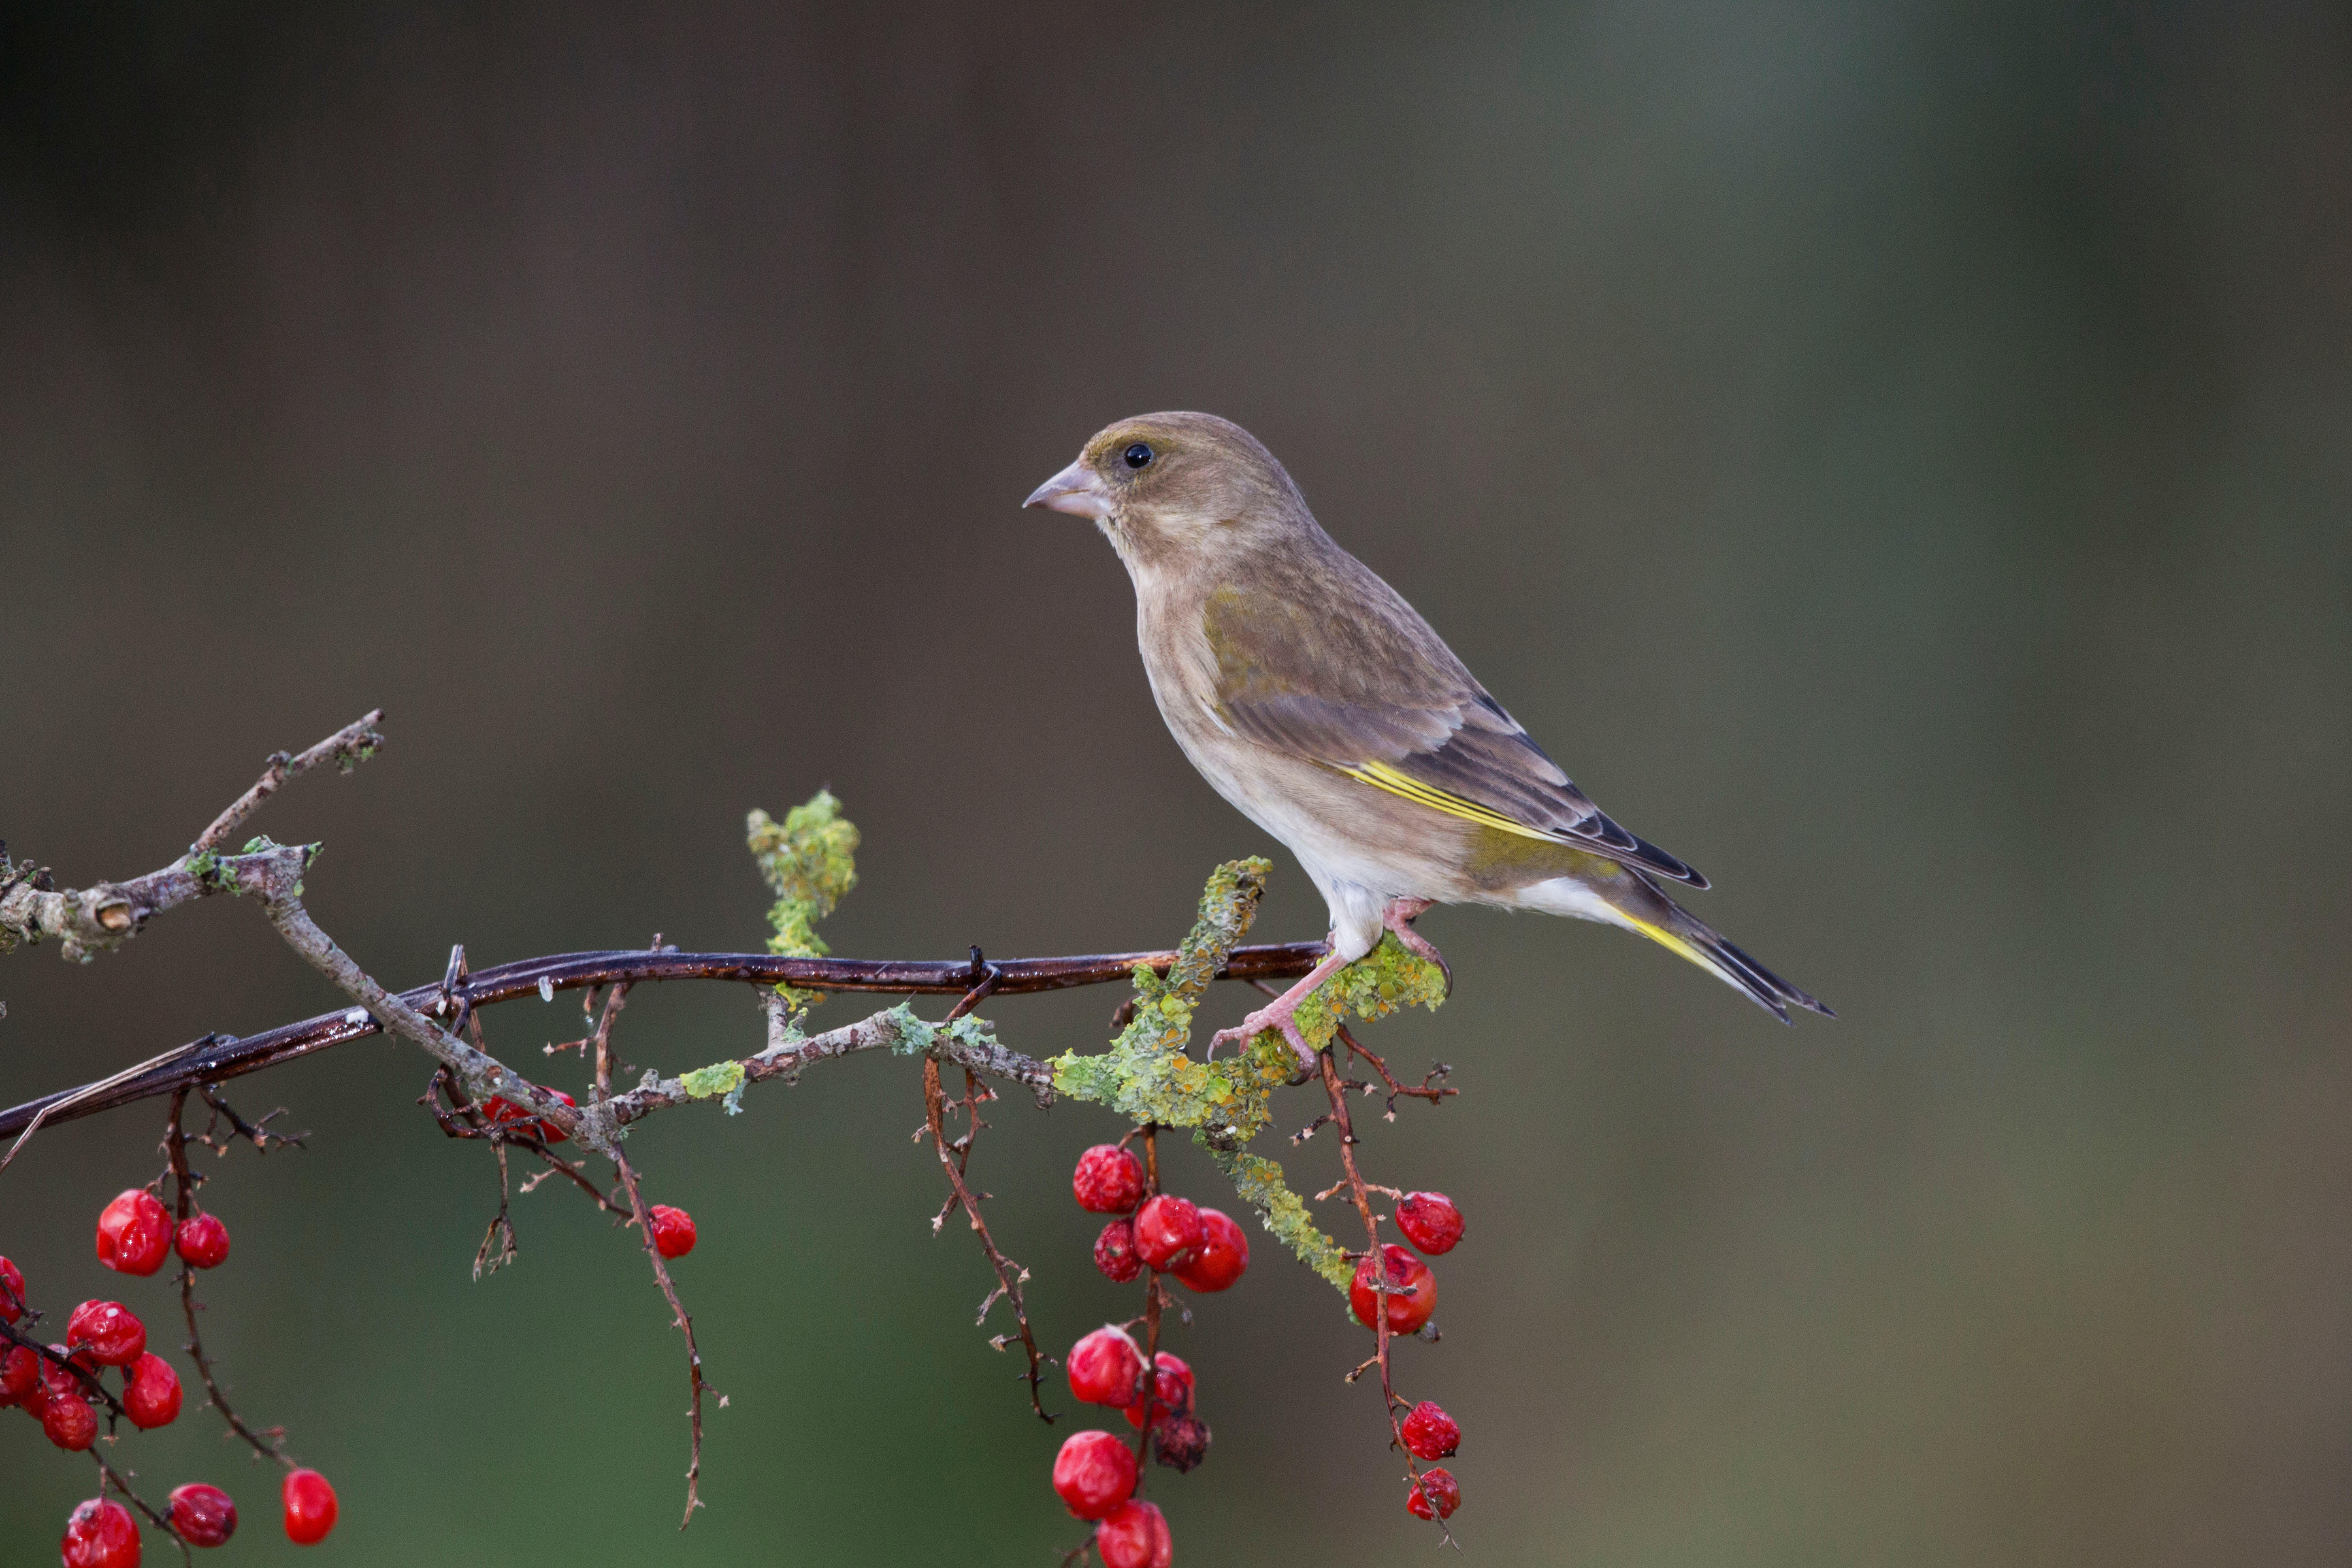 Greenfinch on a branch (Alamy/PA)